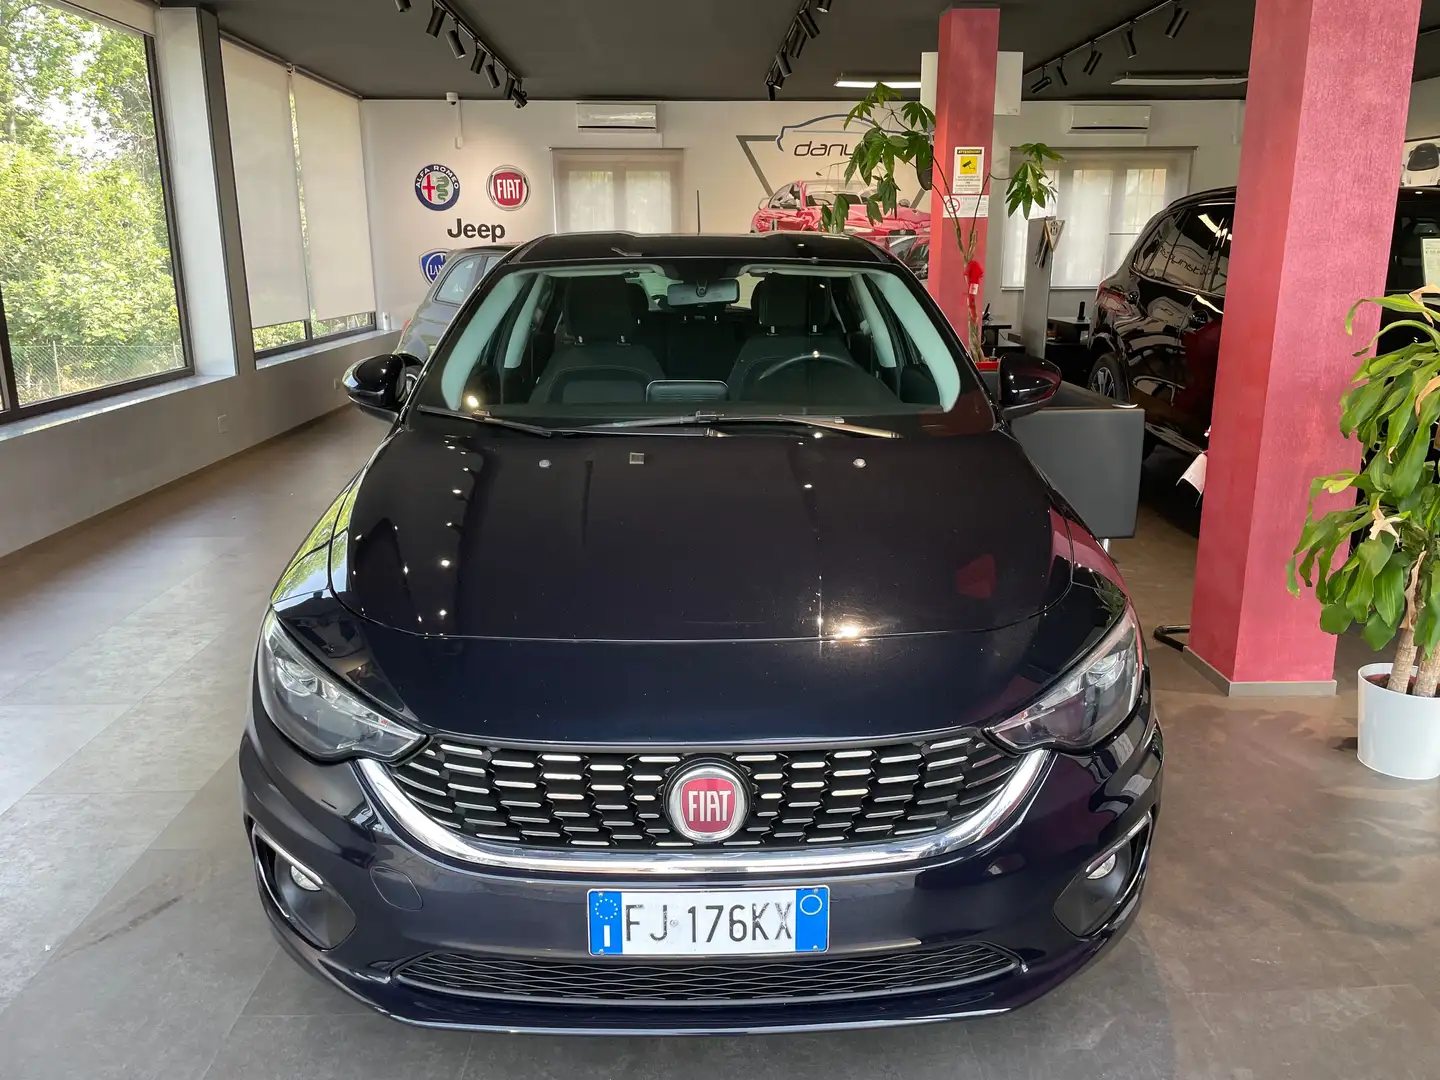 Fiat Tipo Tipo 5p 1.6 mjt Business s Blauw - 2